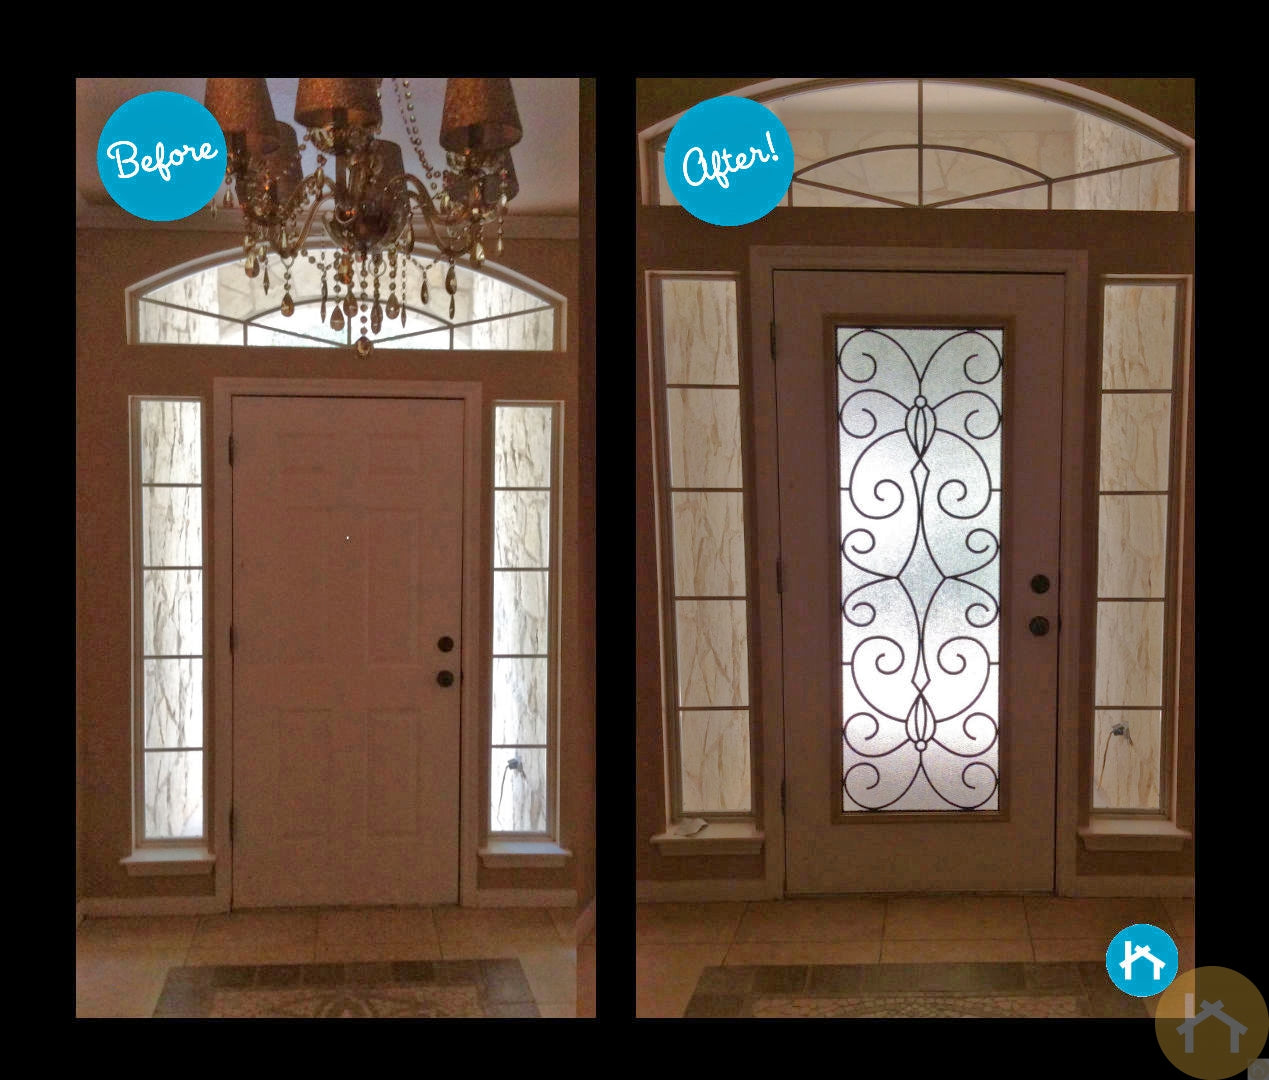 Adding Wrought Iron Decorative Door Glass for More Natural Light - Transformation Tuesday